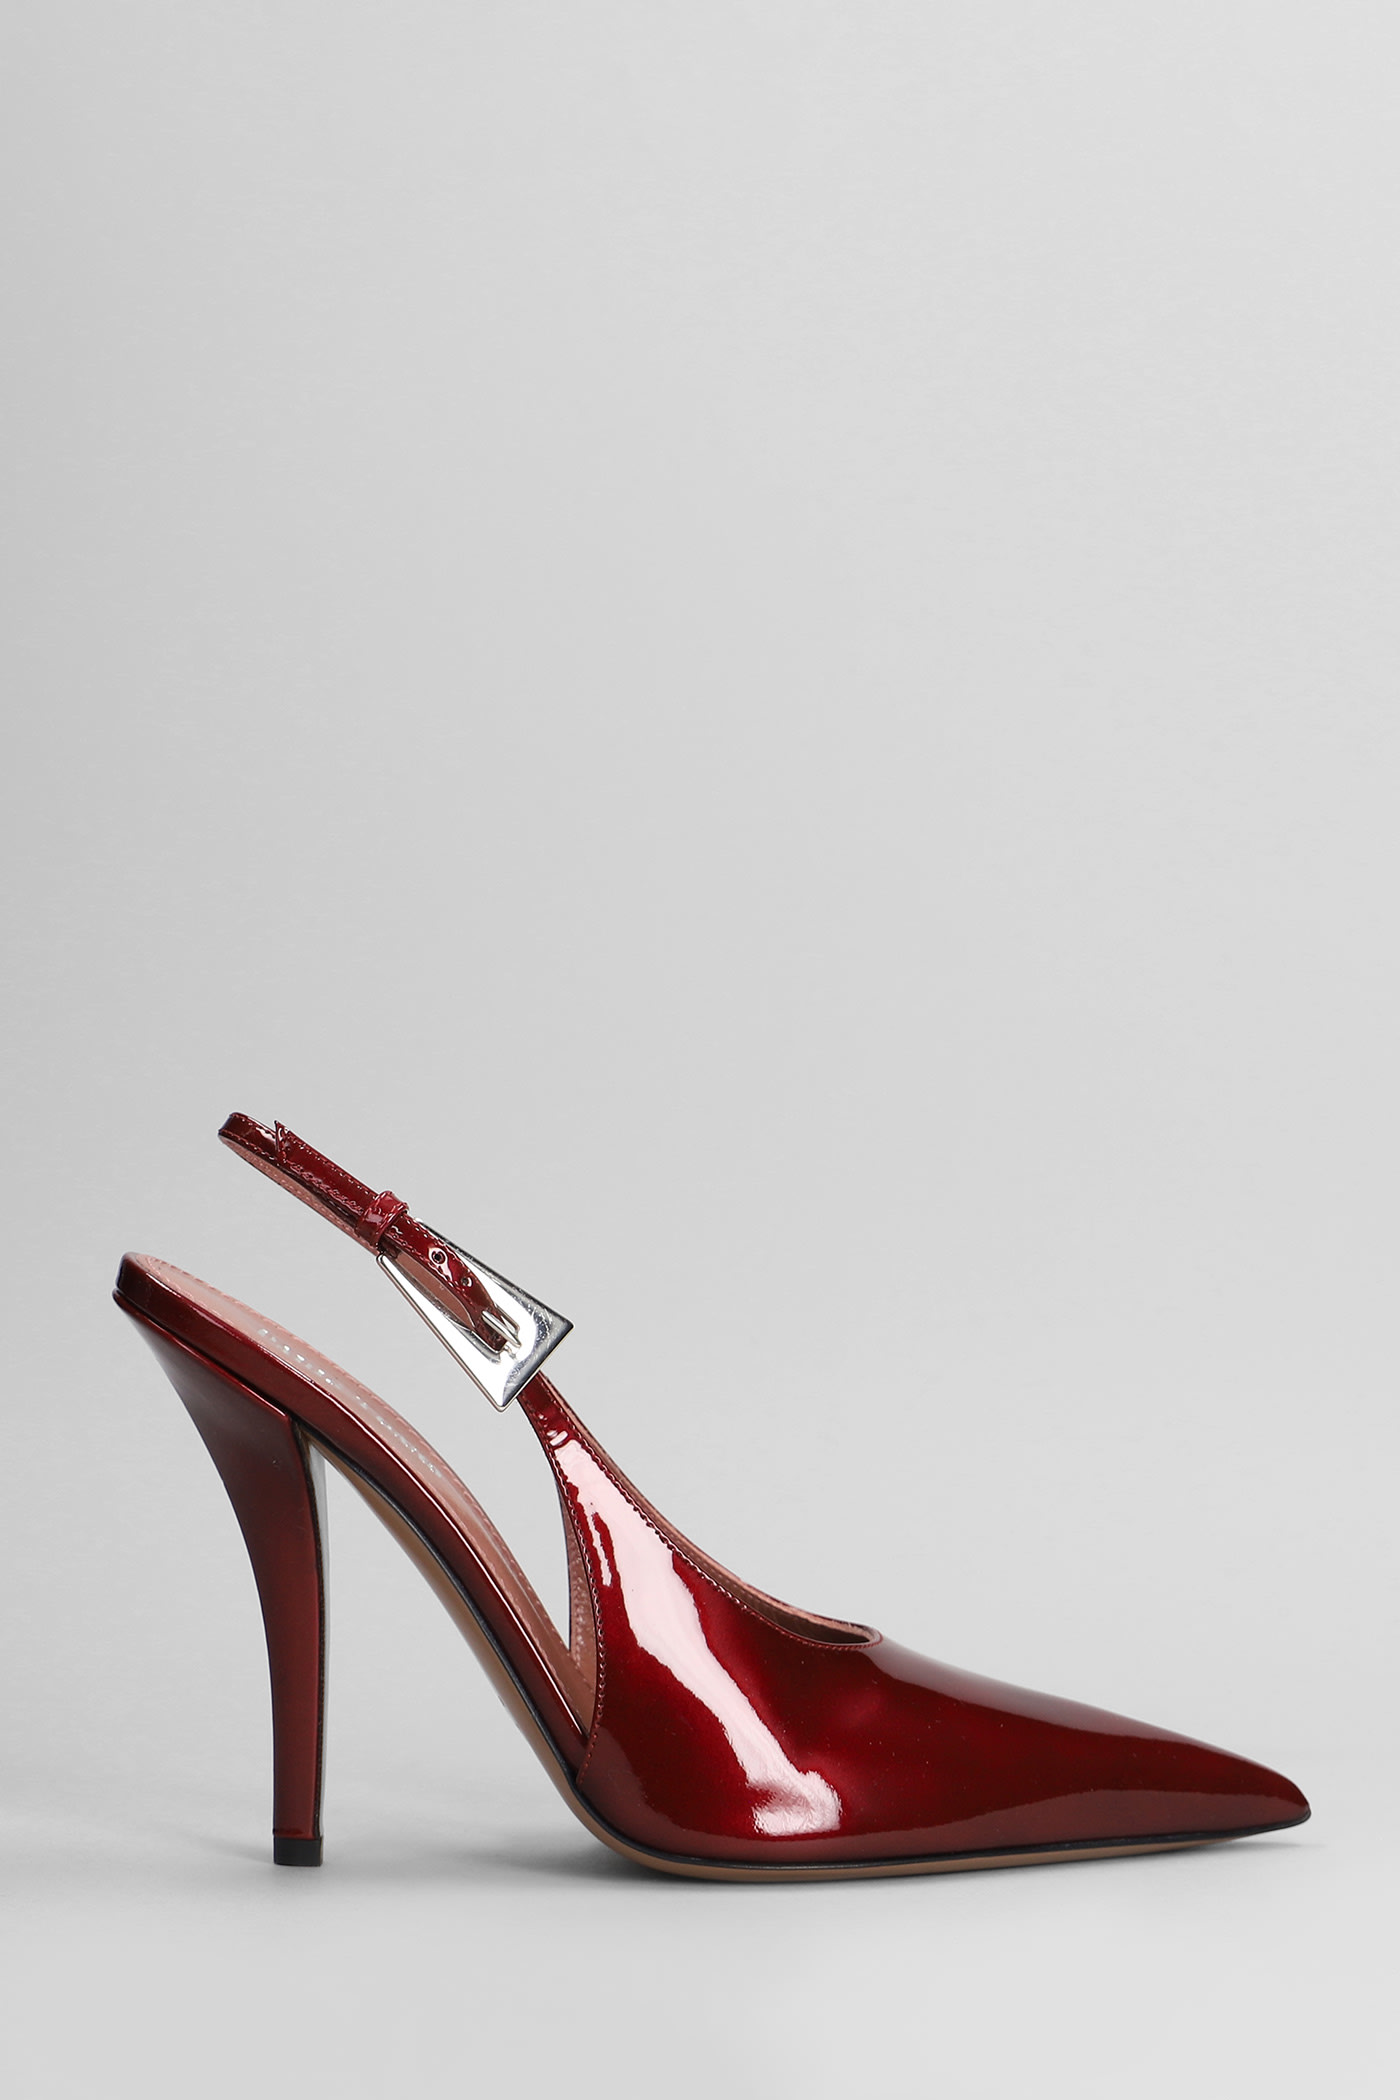 Jessica Slingbac 105 Pumps In Bordeaux Patent Leather